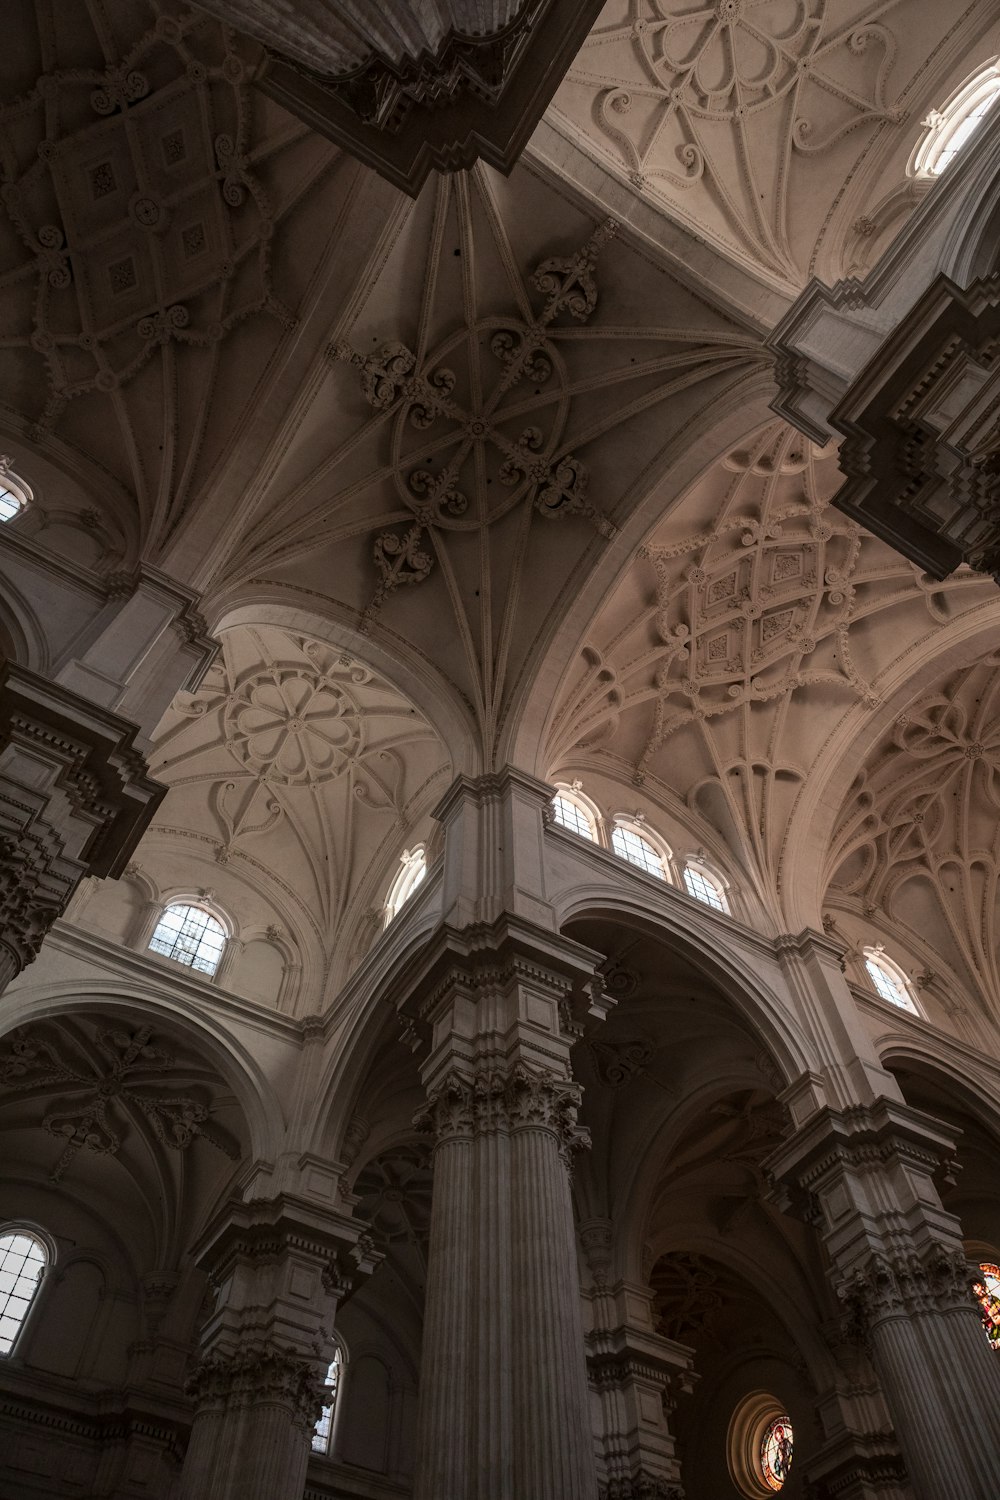 the ceiling of a large cathedral with many windows